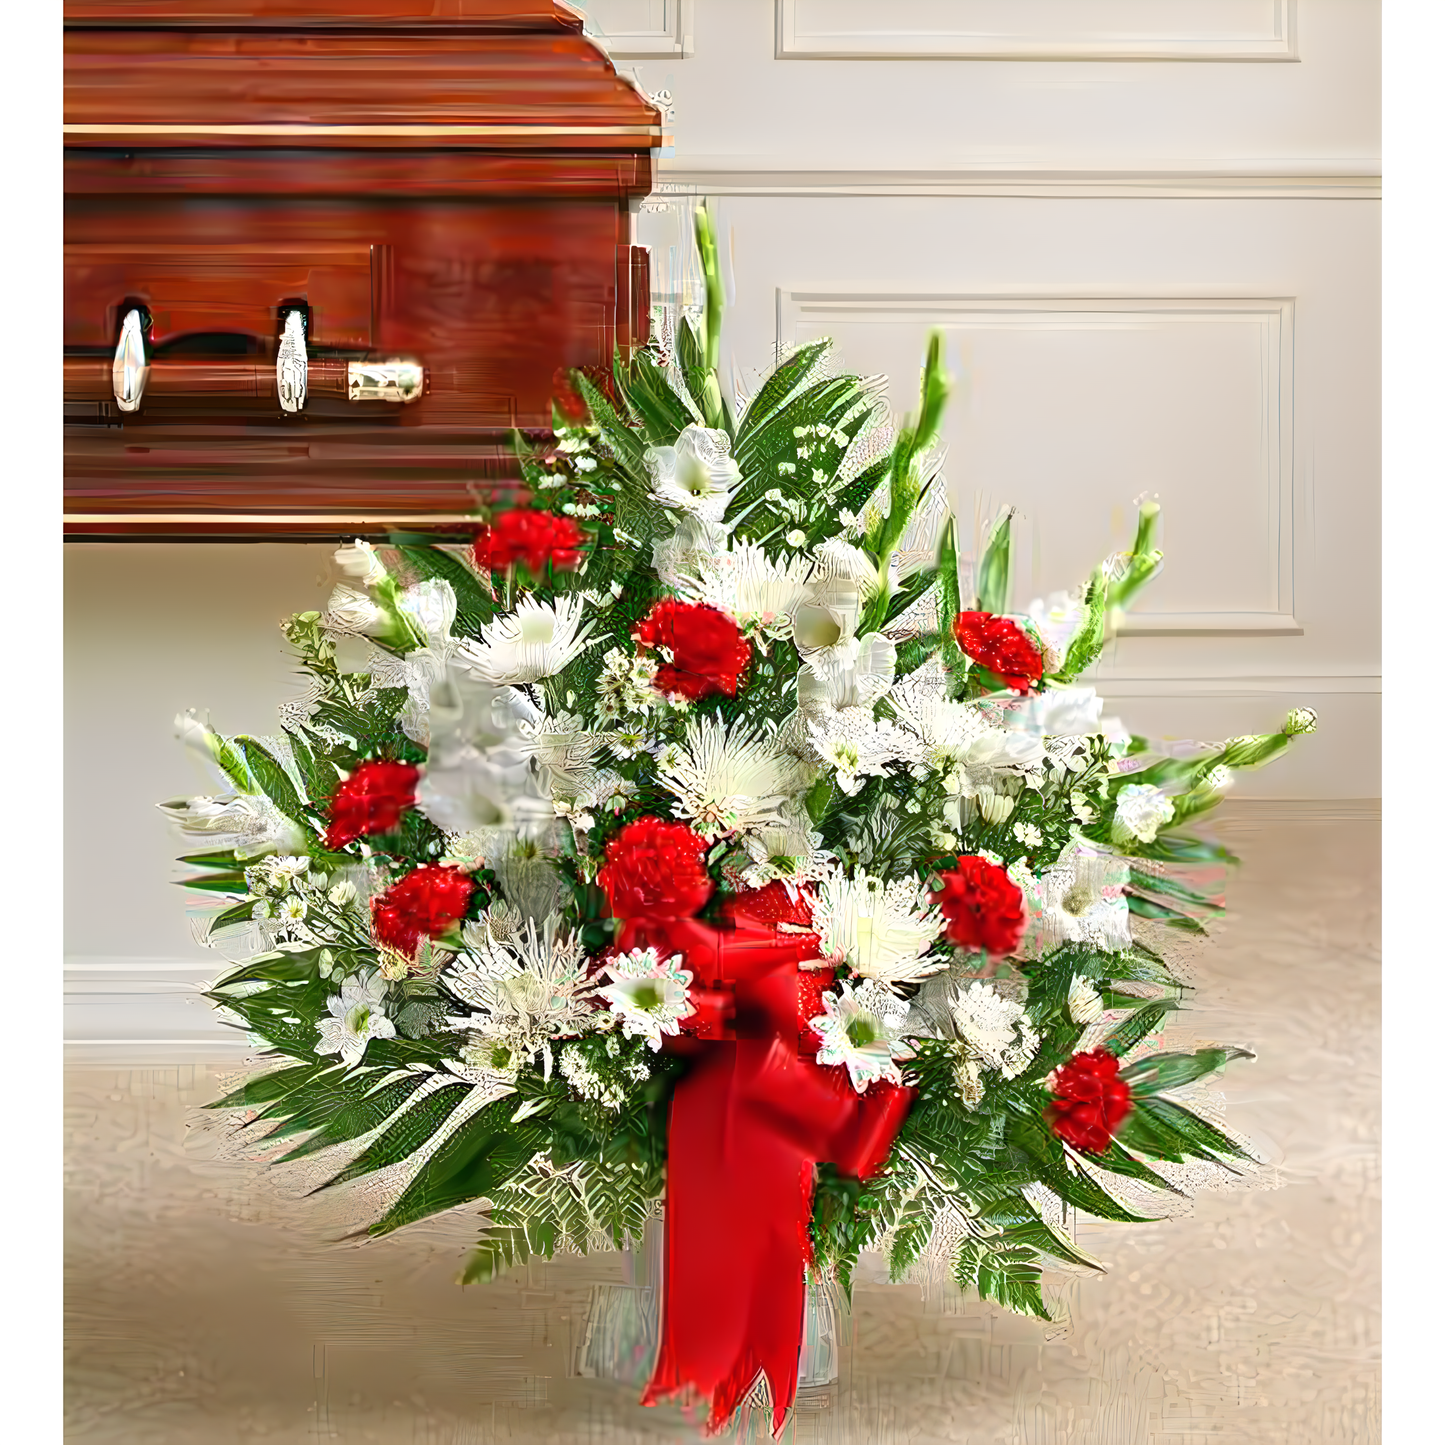 Tribute Red & White Floor Basket Arrangement - Funeral > For the Service